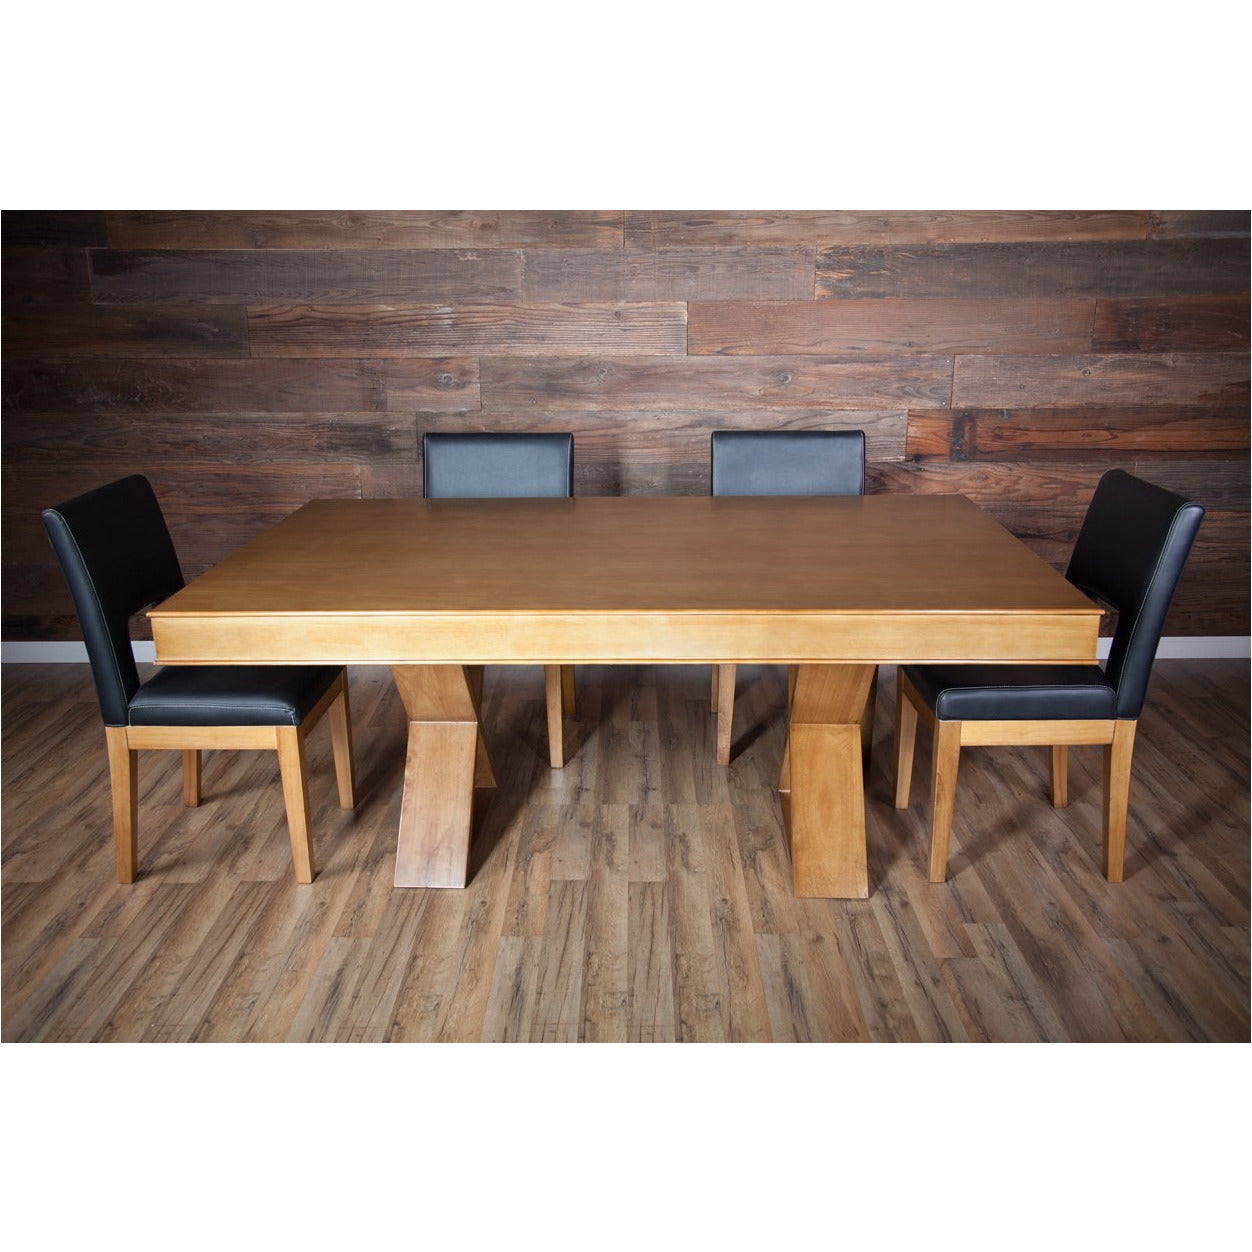 BBO Halmsley Poker Table Dining With Chair